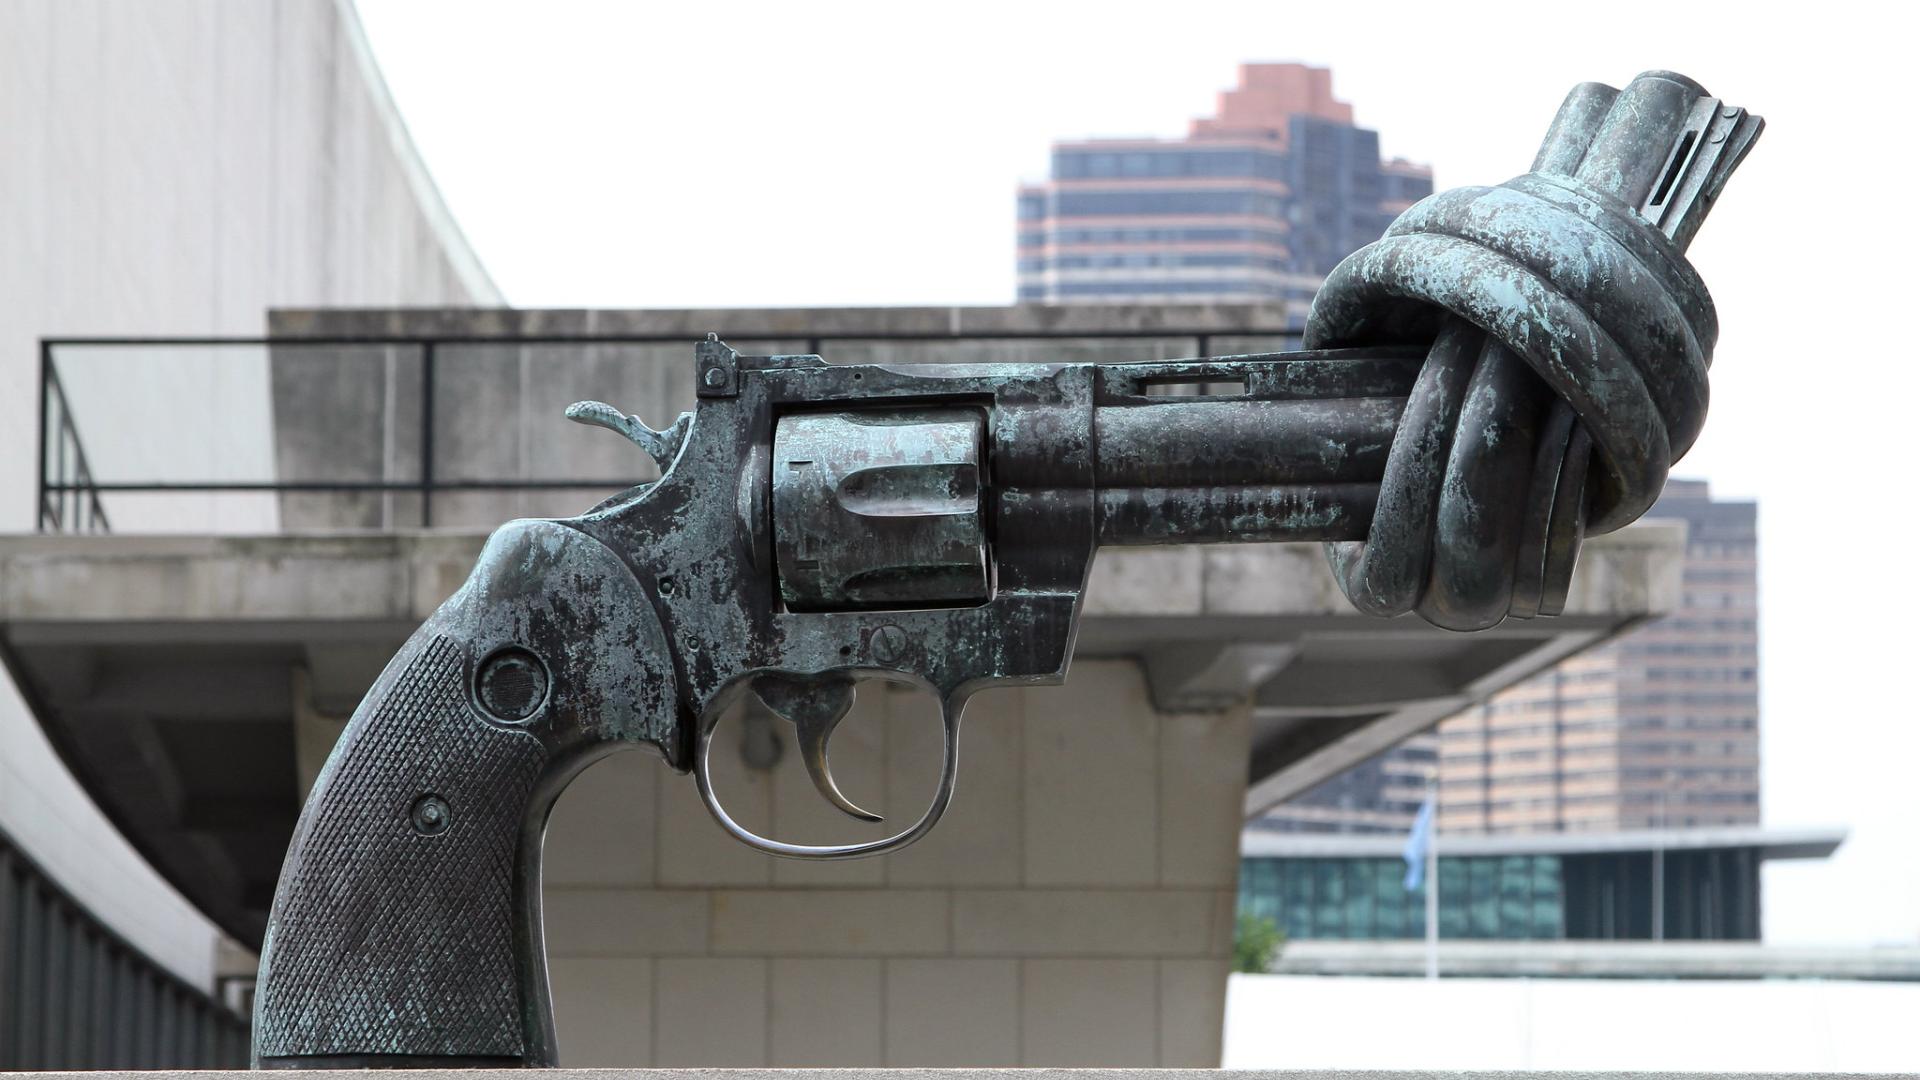 A large statue of a knotted gun at the UN in New York